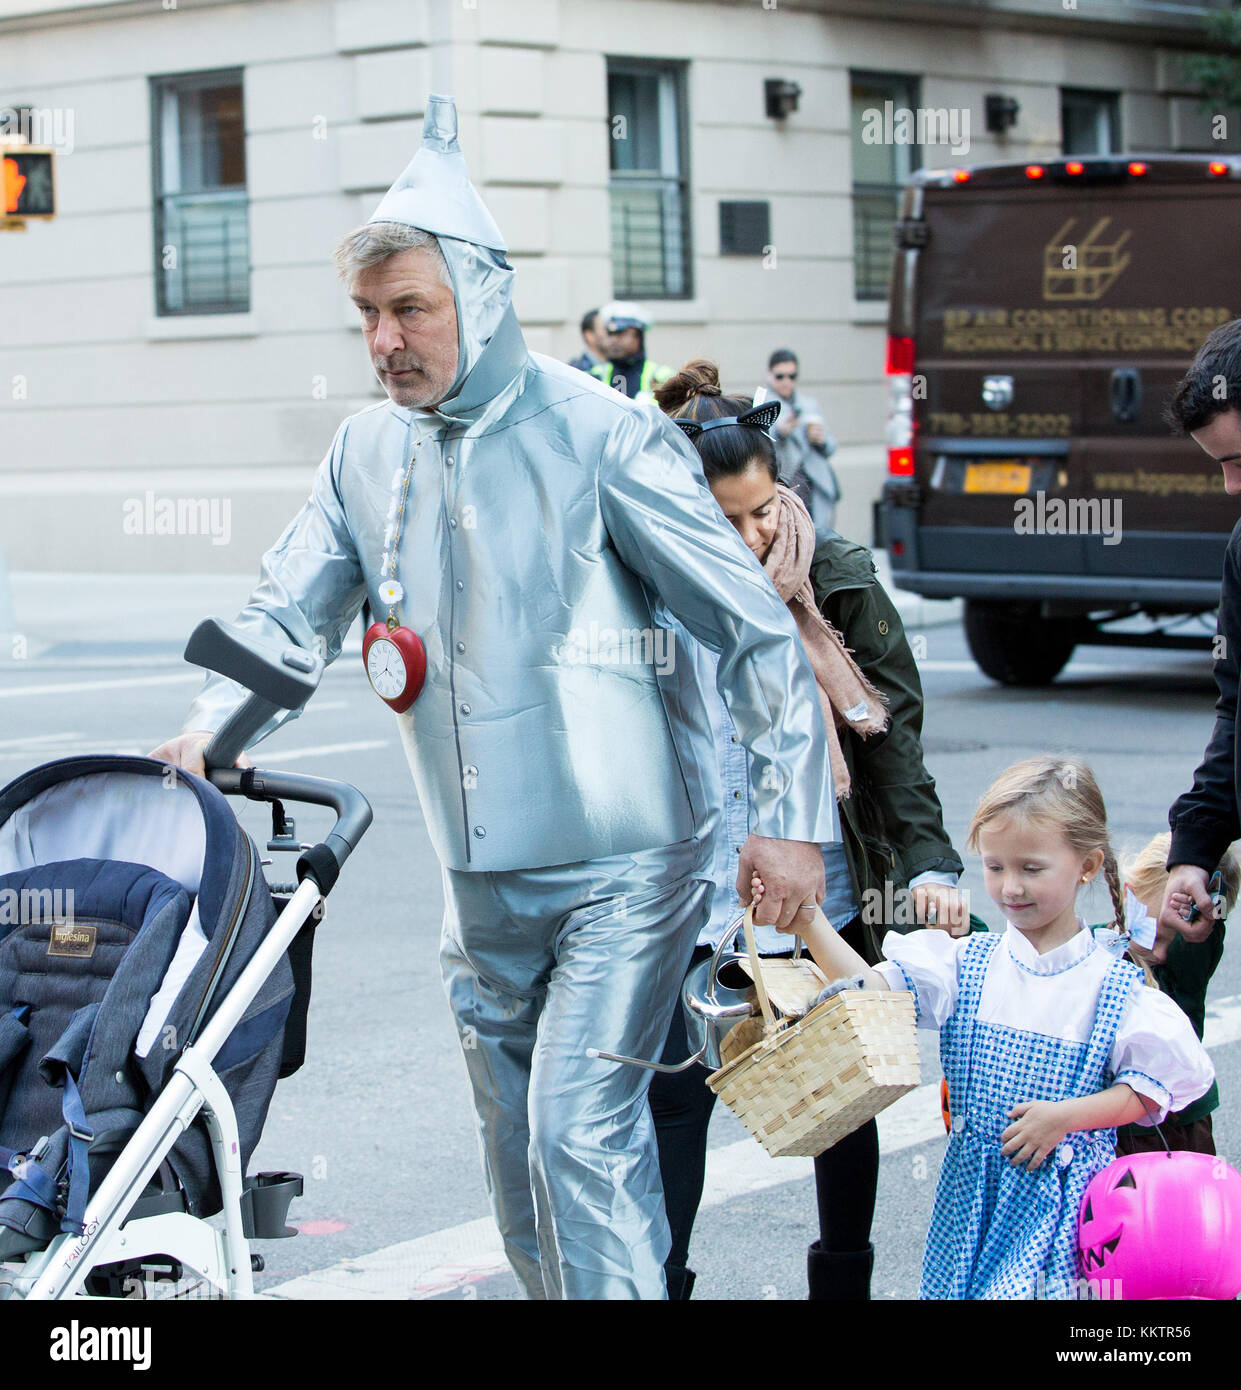 alec-baldwin-and-family-dress-up-in-wizard-of-oz-costumes-to-go-trick-KKTR56.jpg